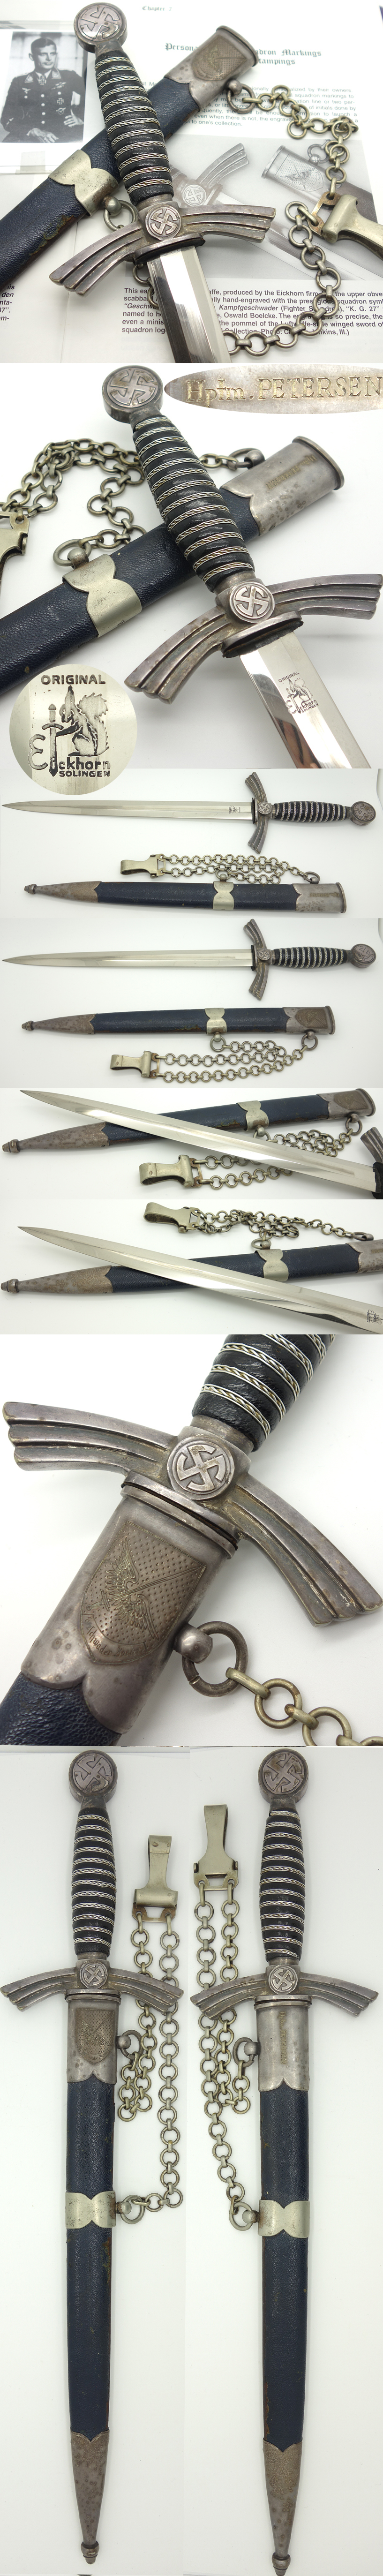 Personalized Published 1st Model Luftwaffe Dagger to a RK winner